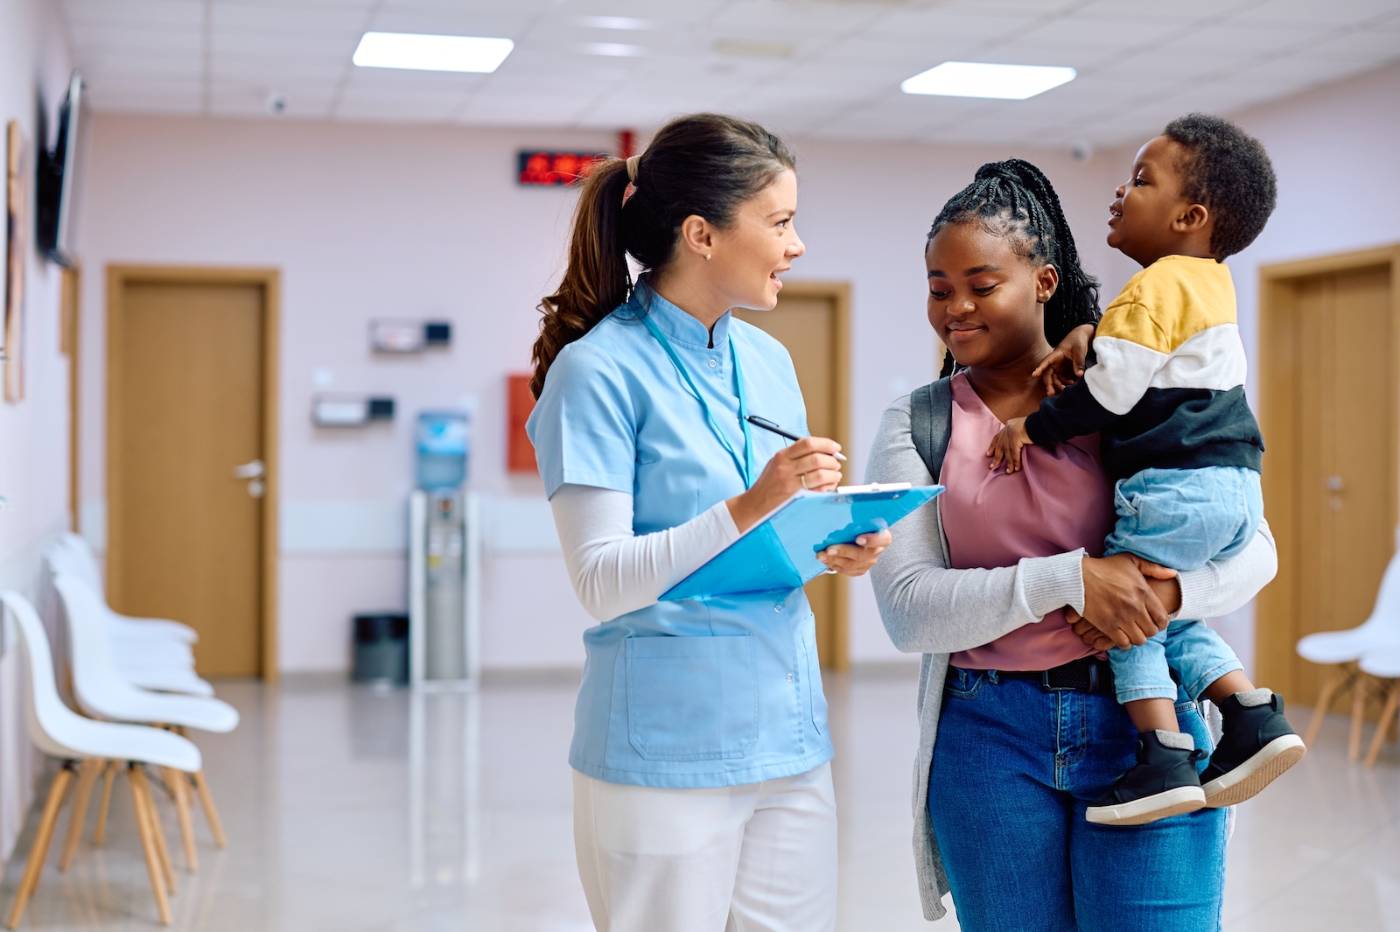 Female medical assistant with clipboard talks with a young mother holding toddler